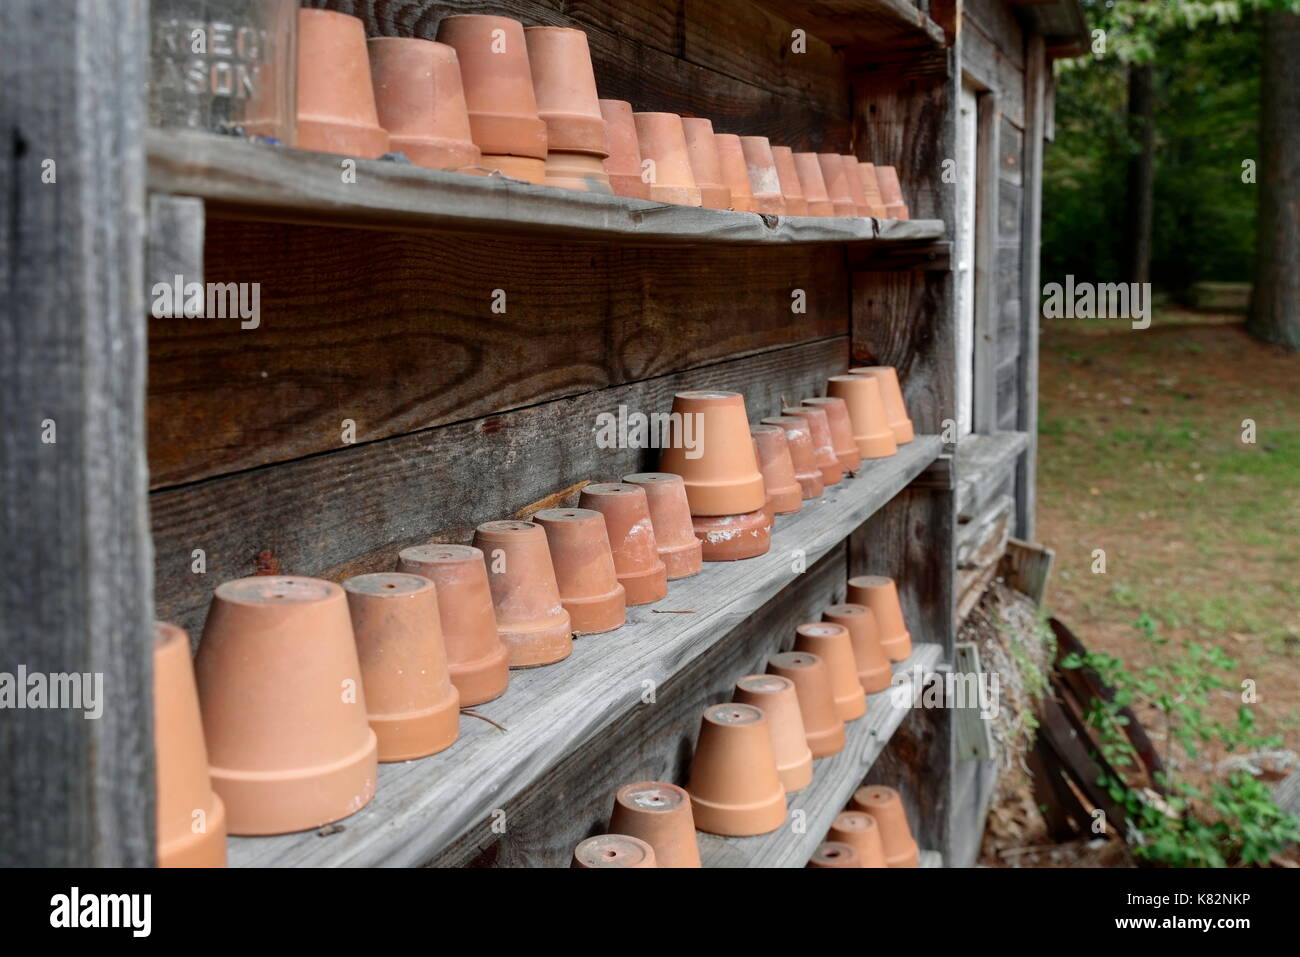 Clay Garden Pots On Shelves At The Furnacetown Living Heritage